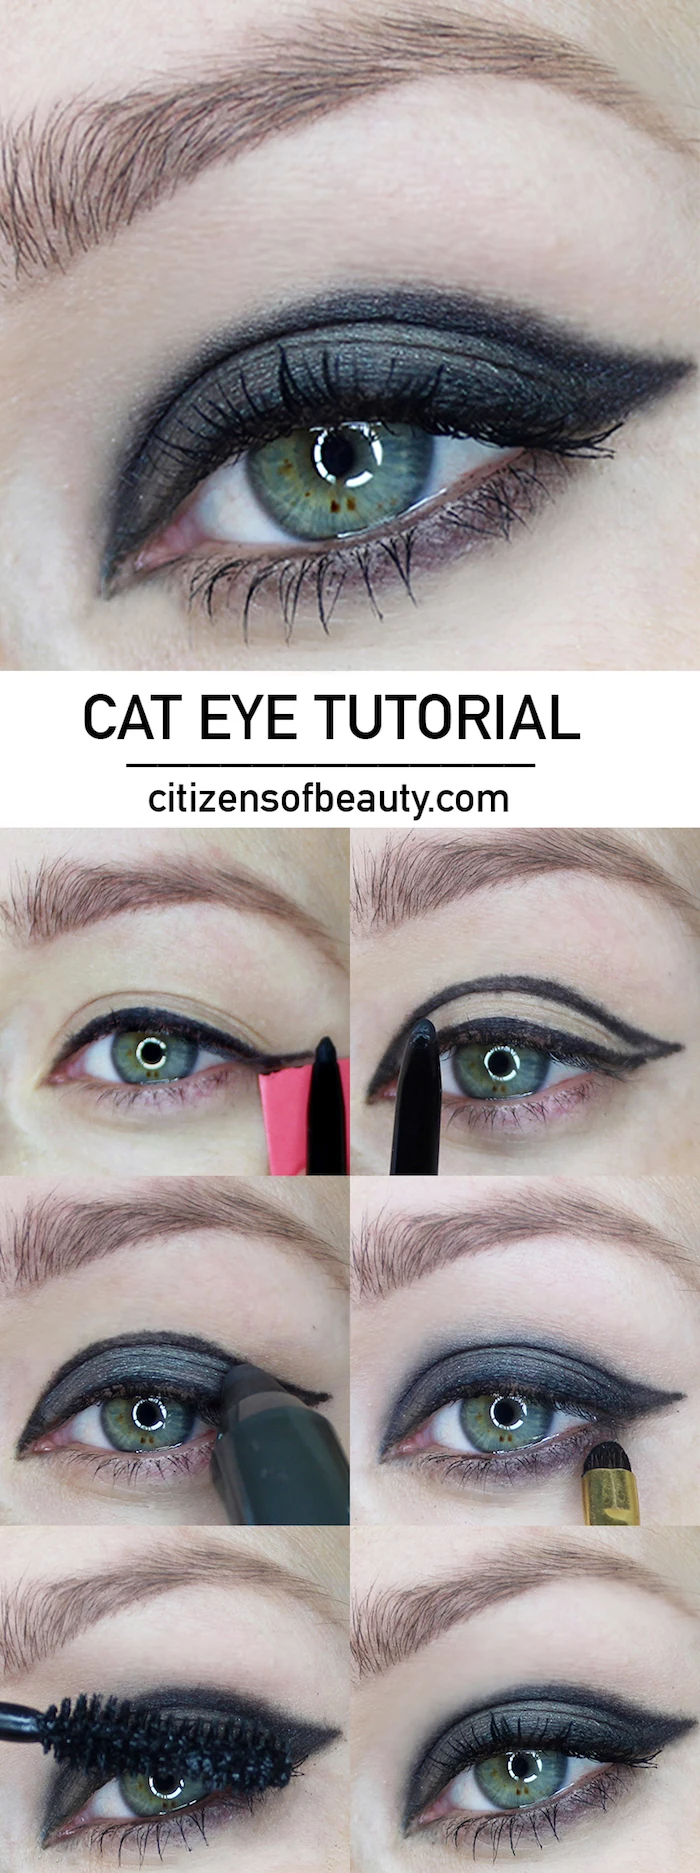 photo collage of step by step cat eye tutorial in six steps winged eyeliner tutorial on woman with green eyes